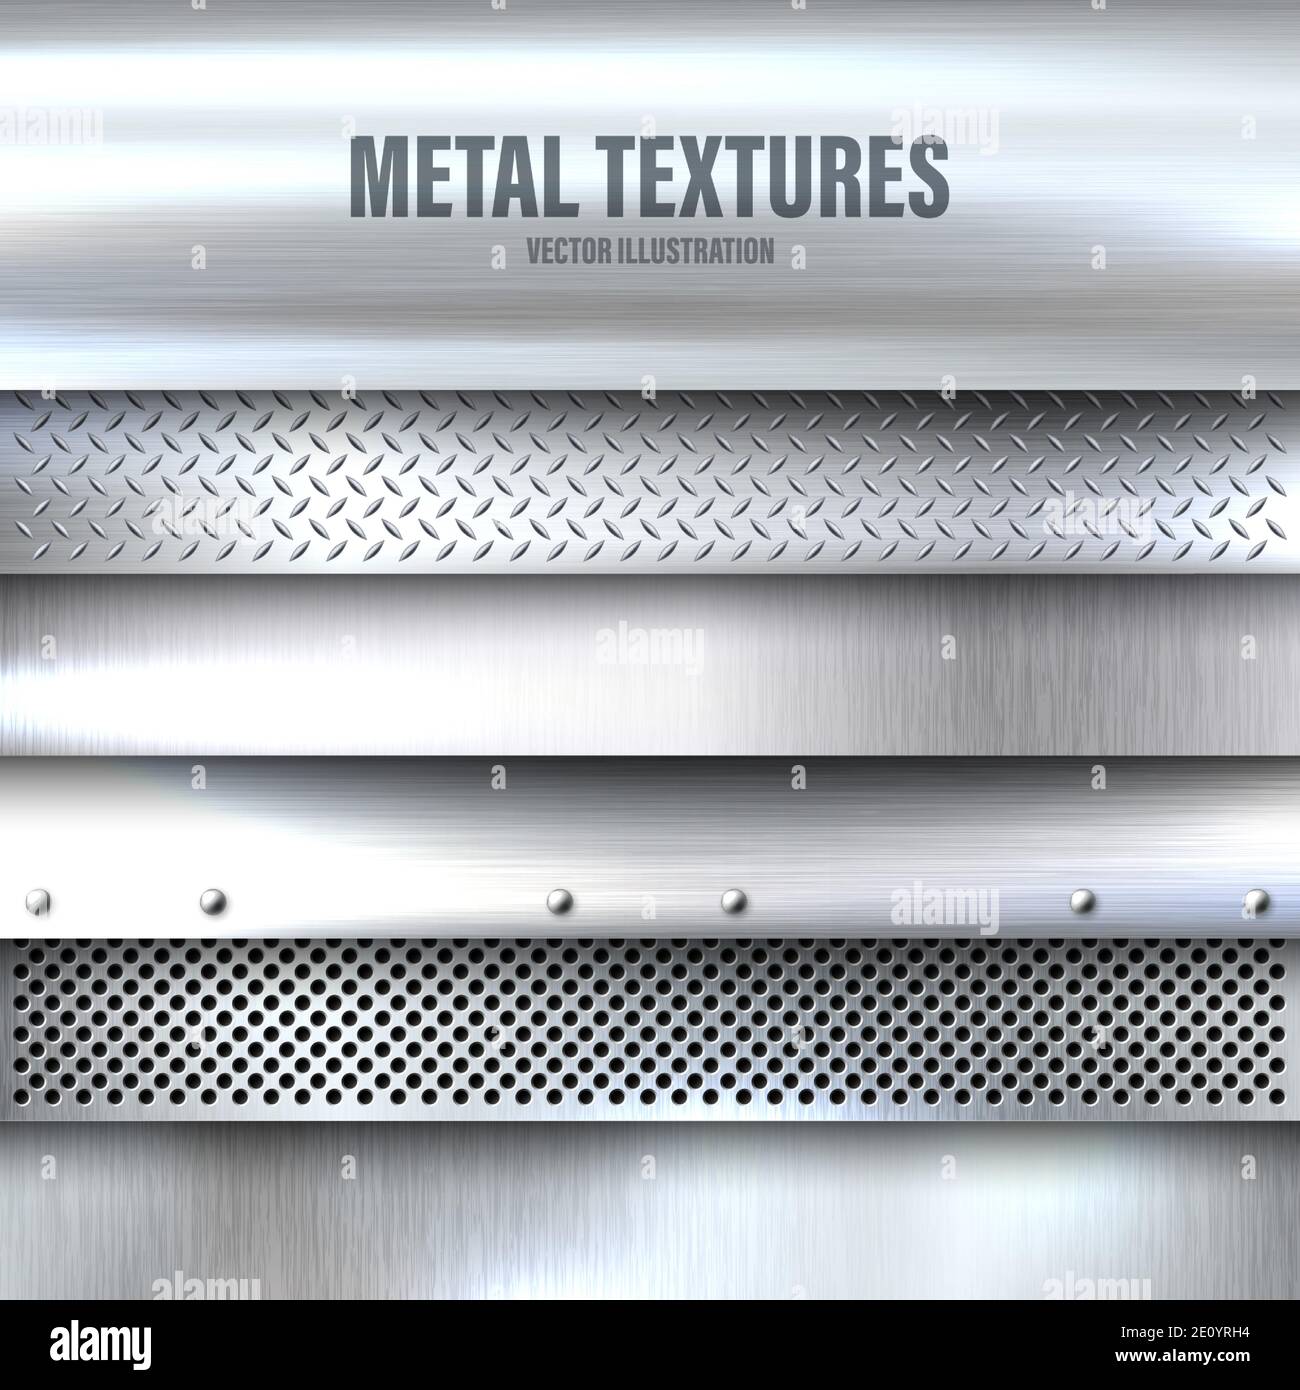 Metal silver steel texture background, shiny brushed metallic texture  plate. Stock Vector